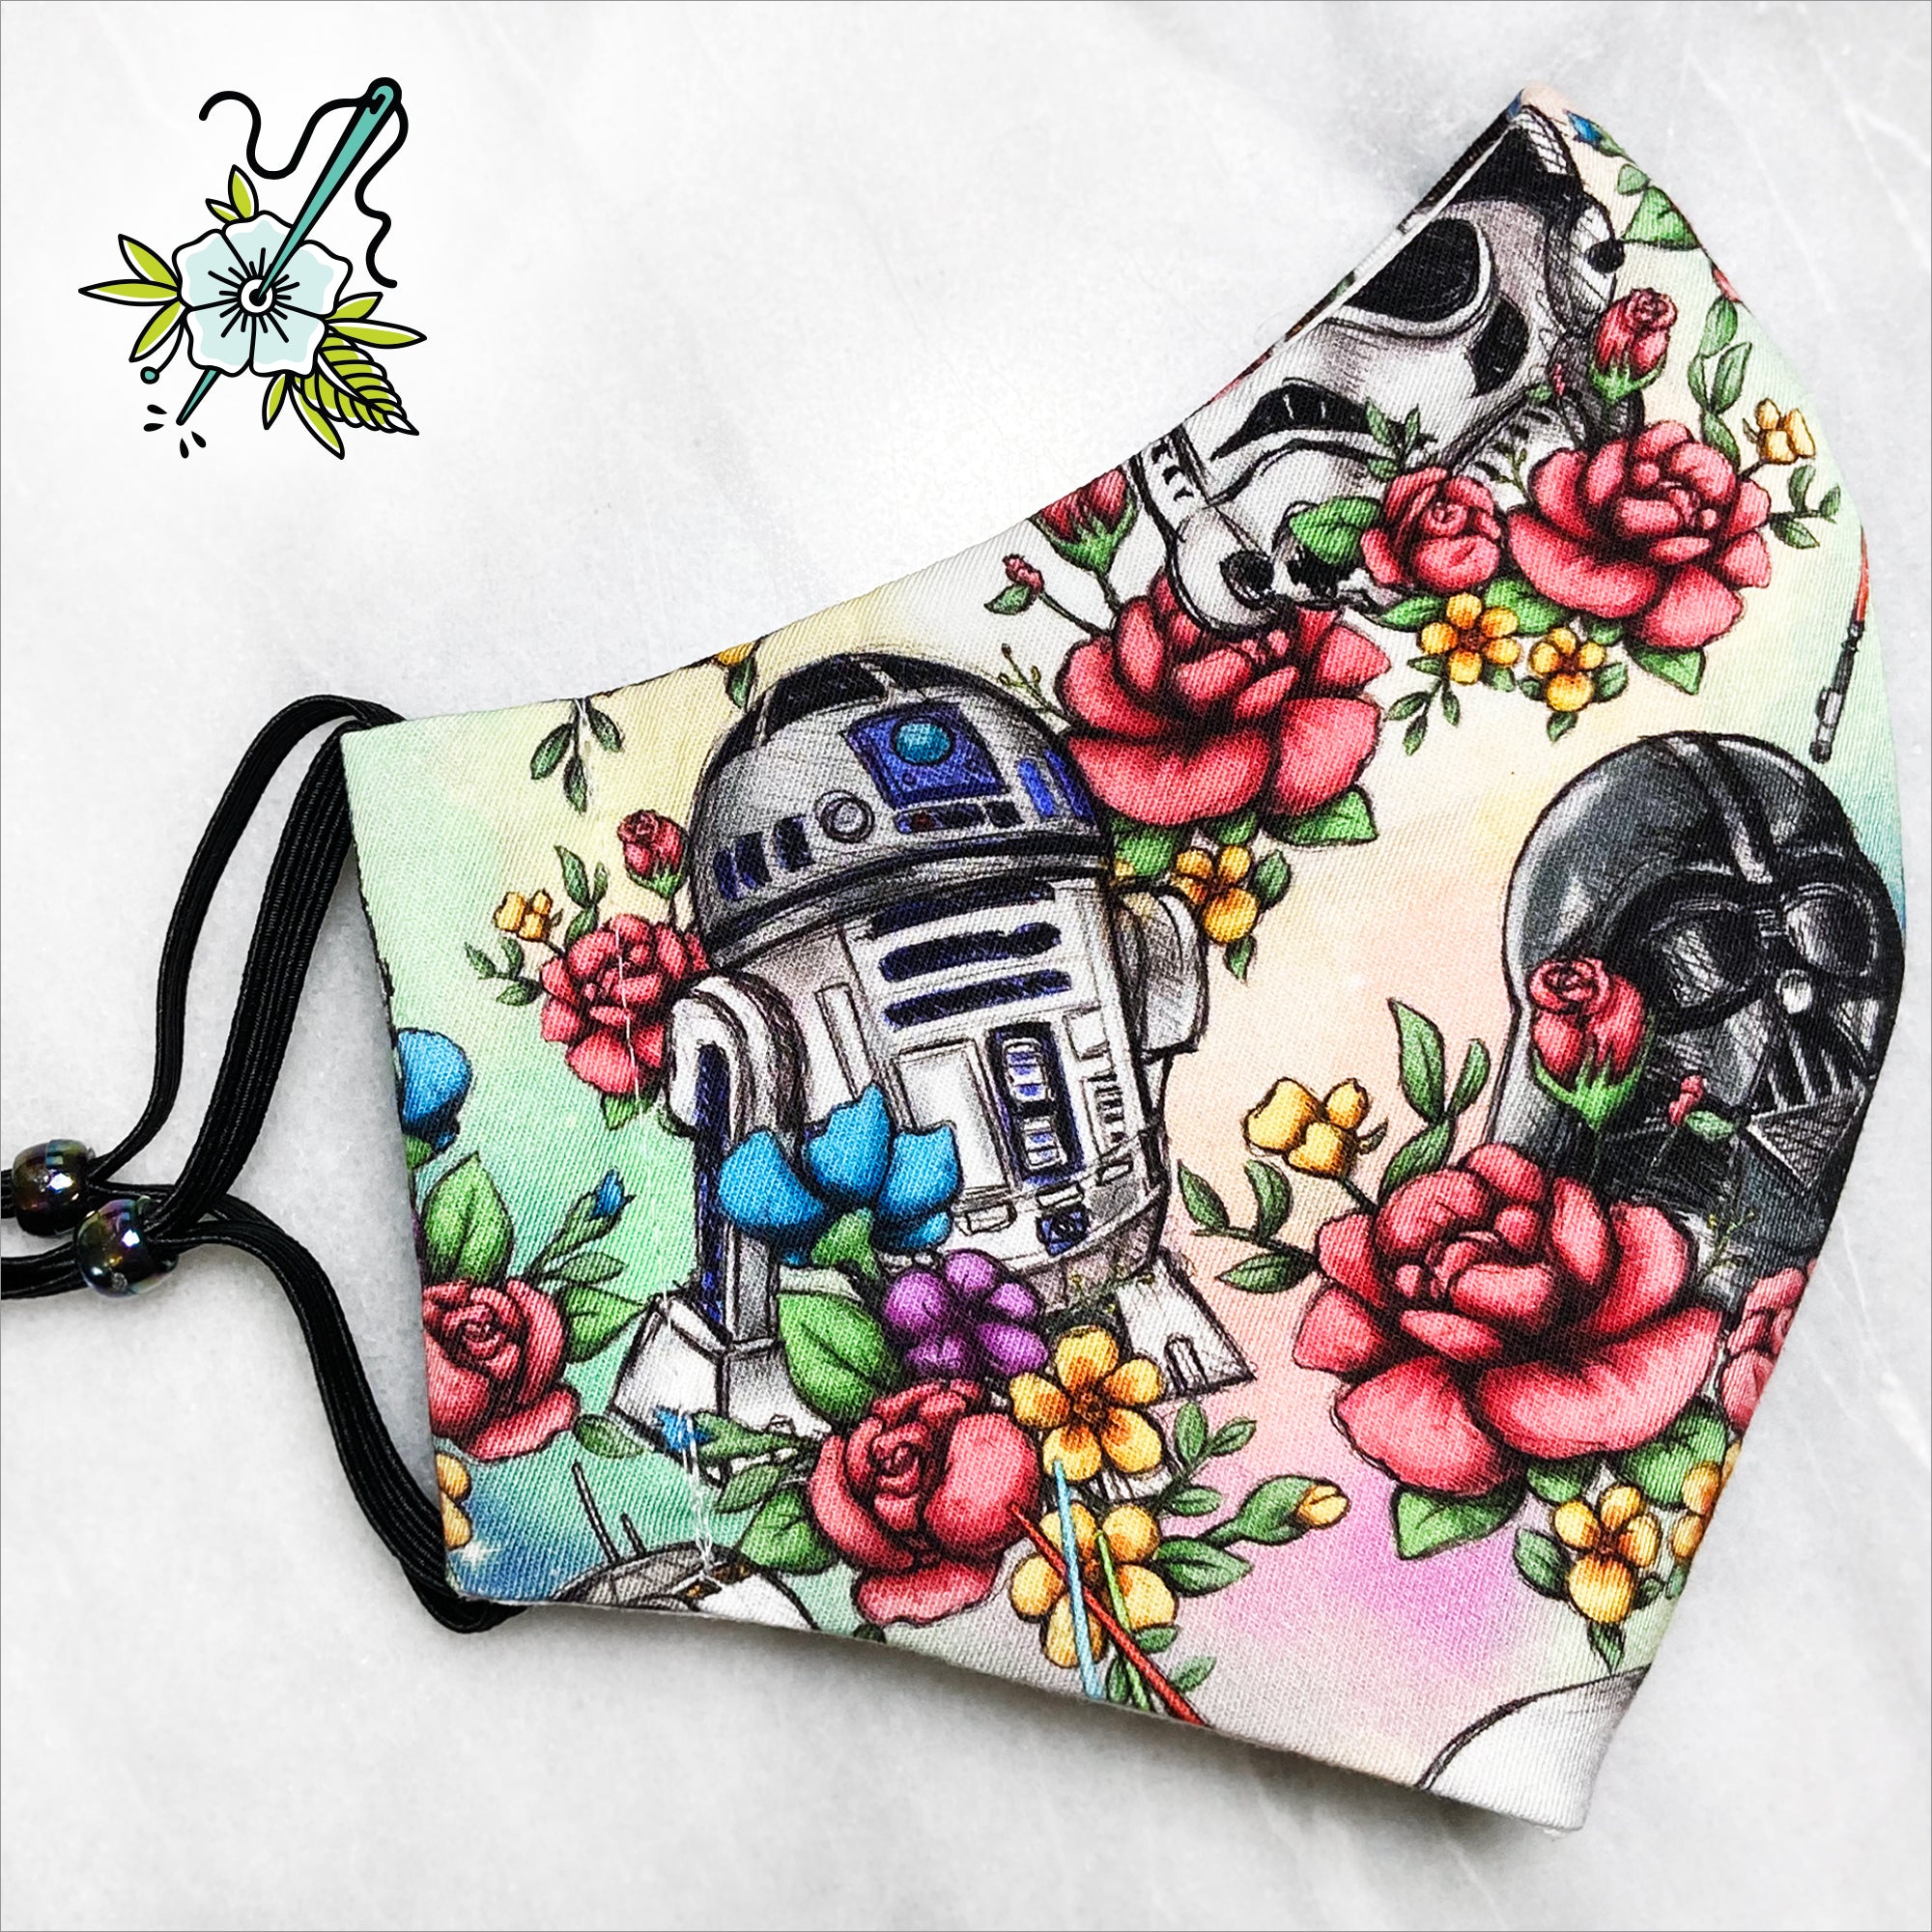 SPECIAL EDITION "The Force" Floral Deluxe Olson Face Mask